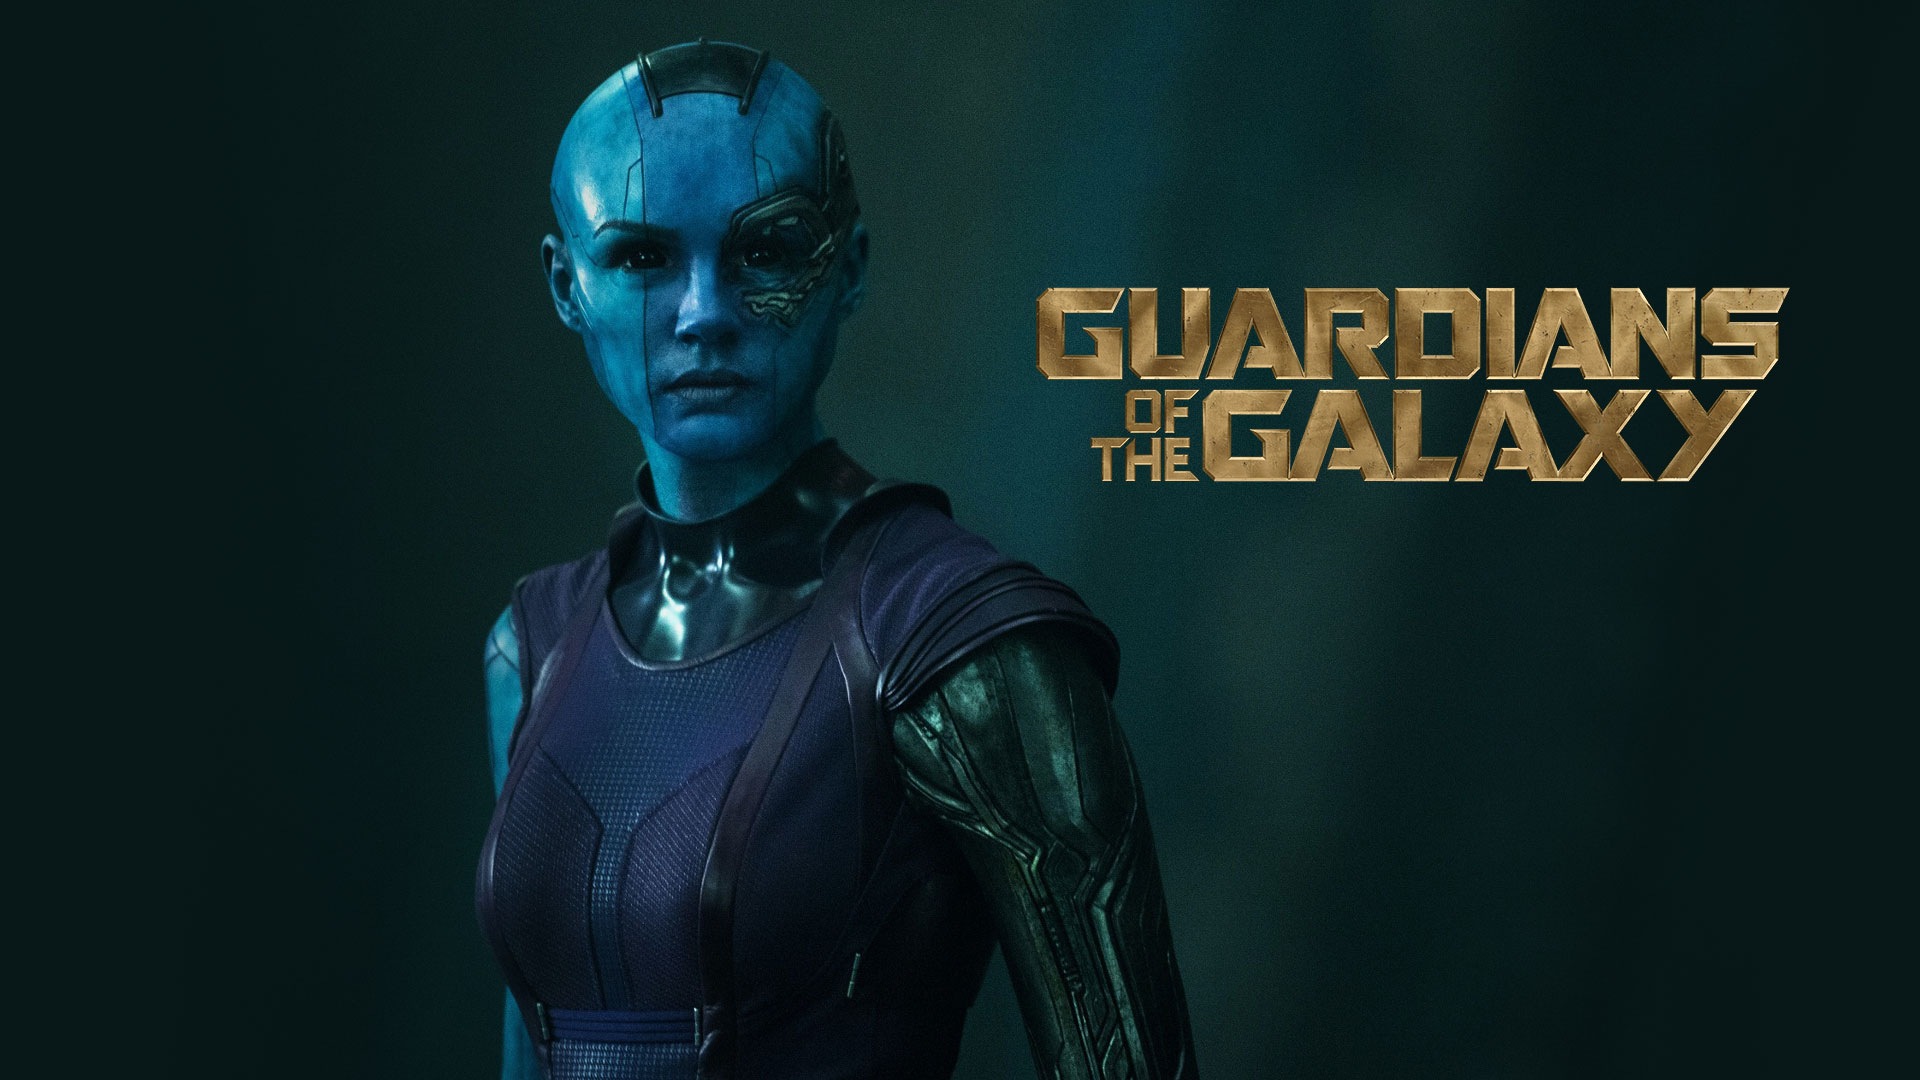 Guardians of the Galaxy 2014 HD movie wallpapers #10 - 1920x1080